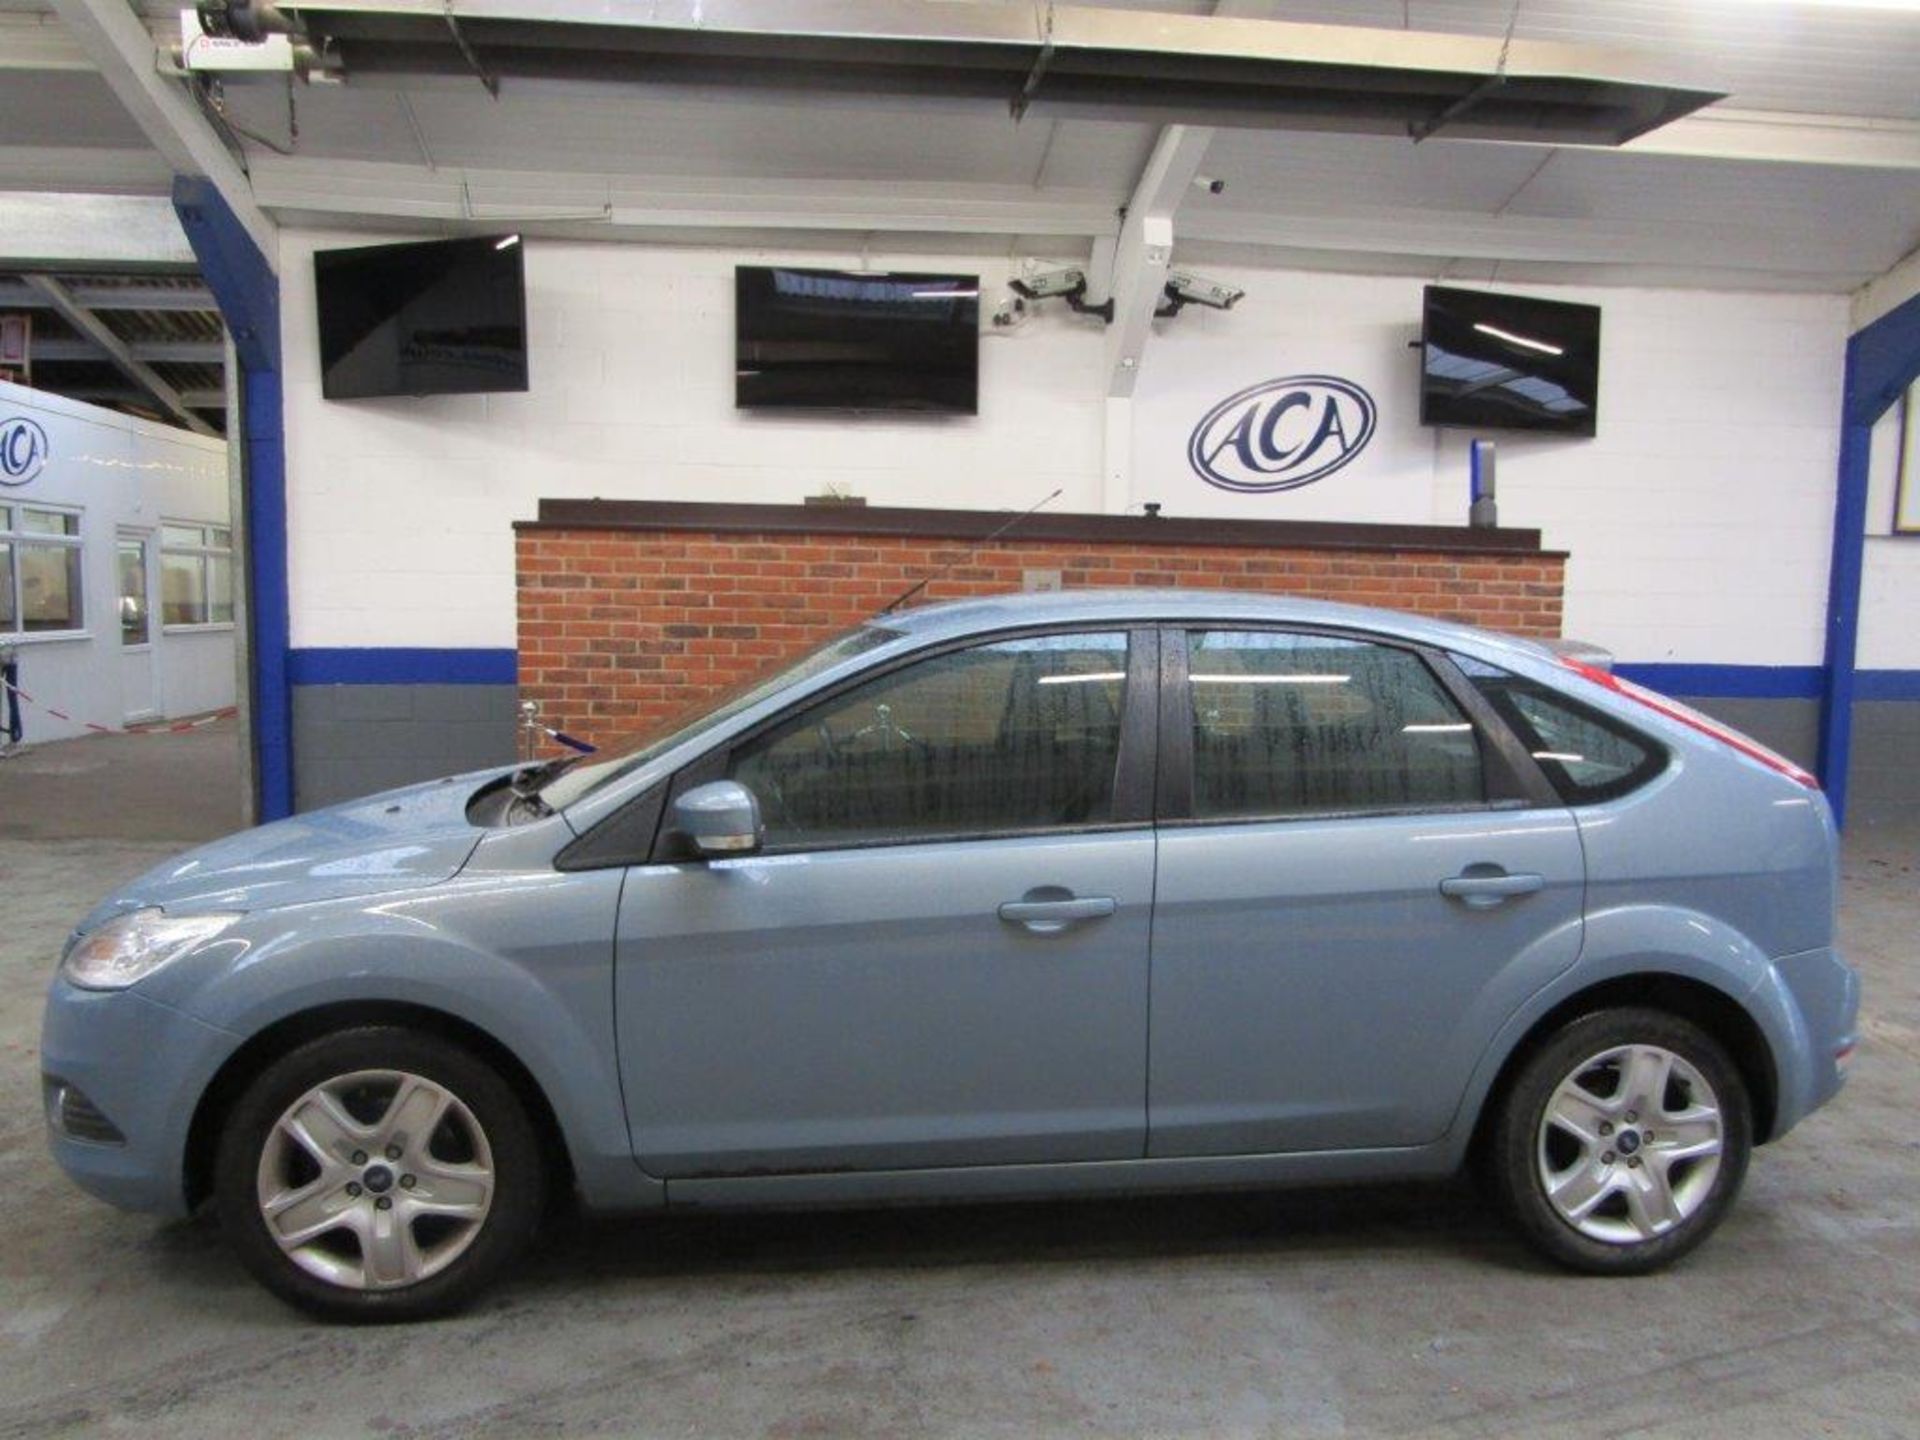 09 09 Ford Focus Style 100 - Image 5 of 19